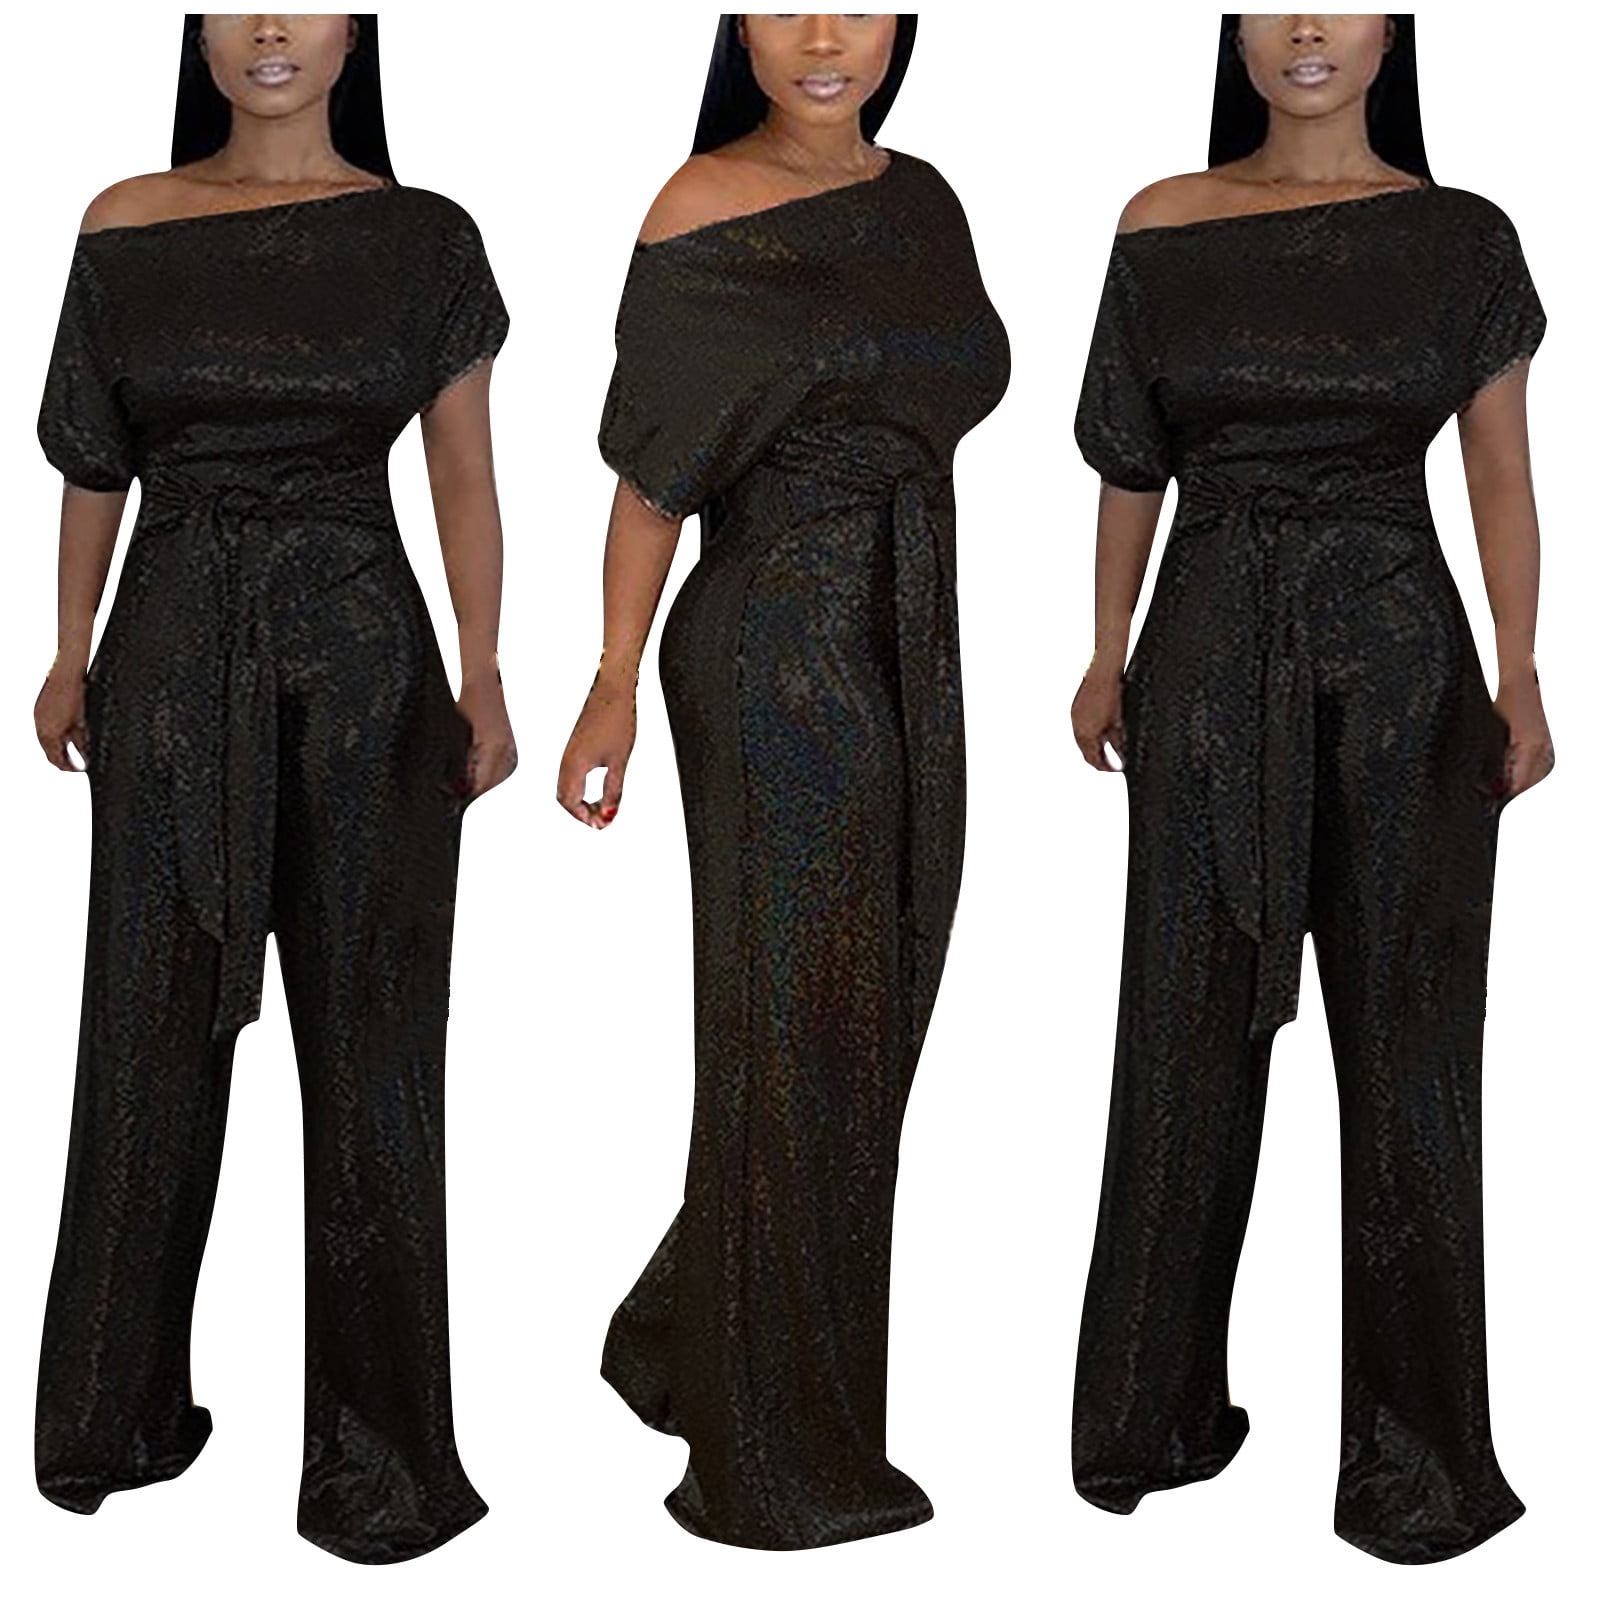 Share more than 141 black jumpsuit fashion best